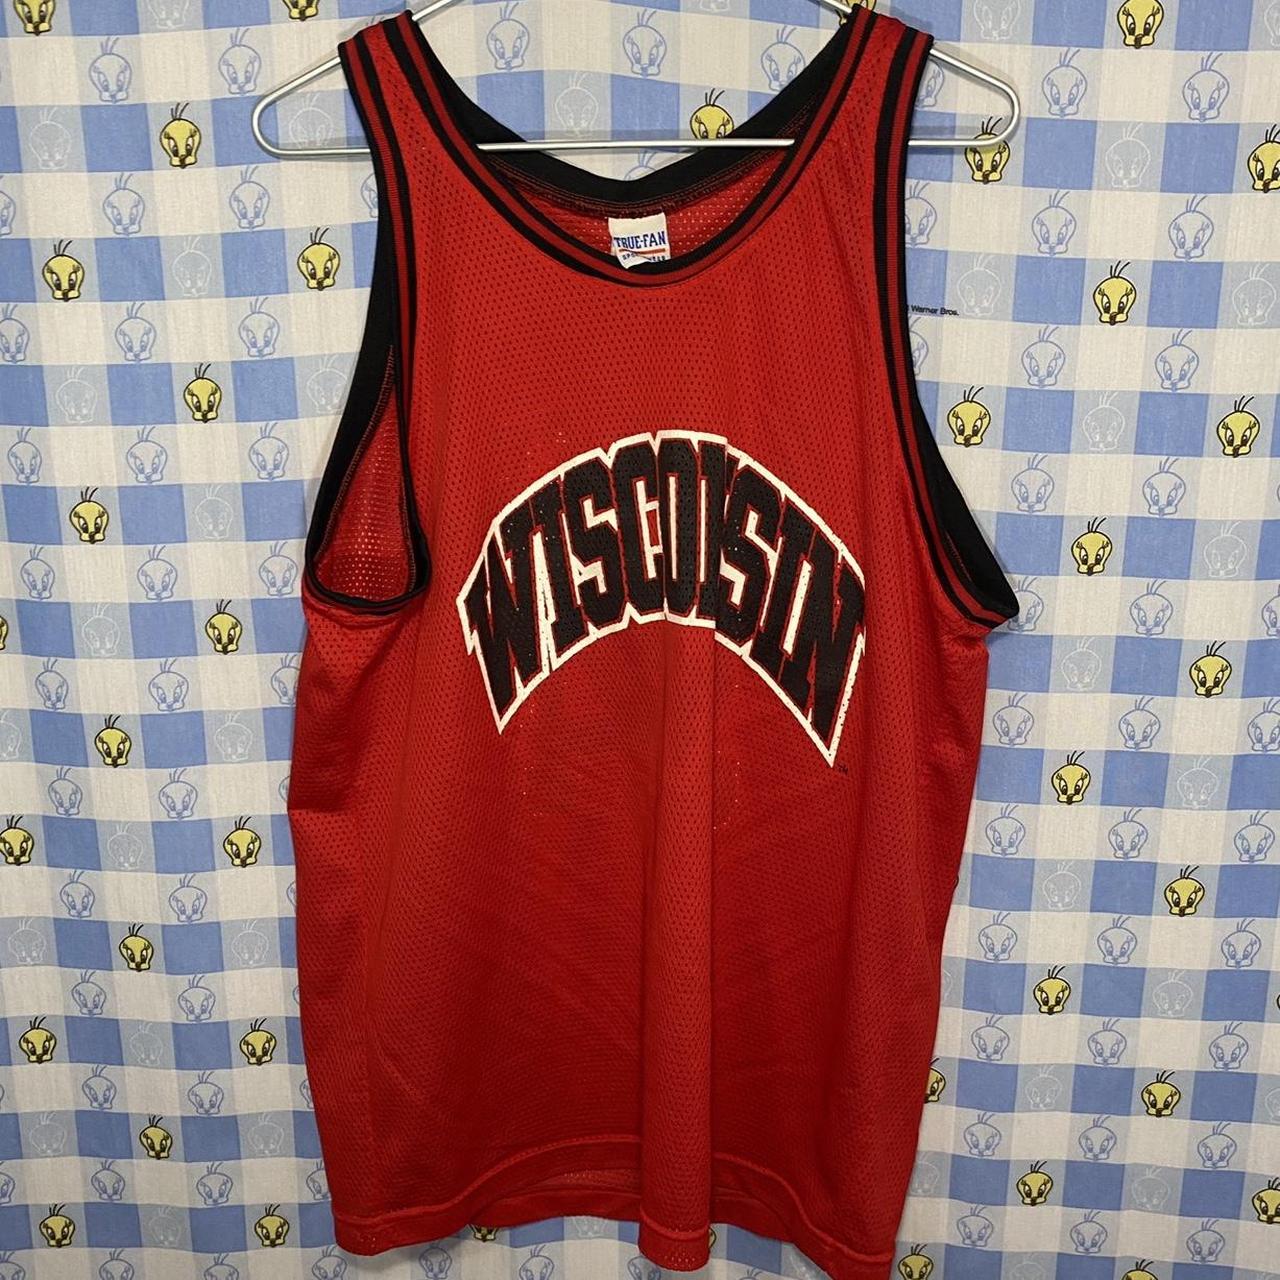 Product Image 1 - Wisconsin Badgers basketball jersey
Red Black,